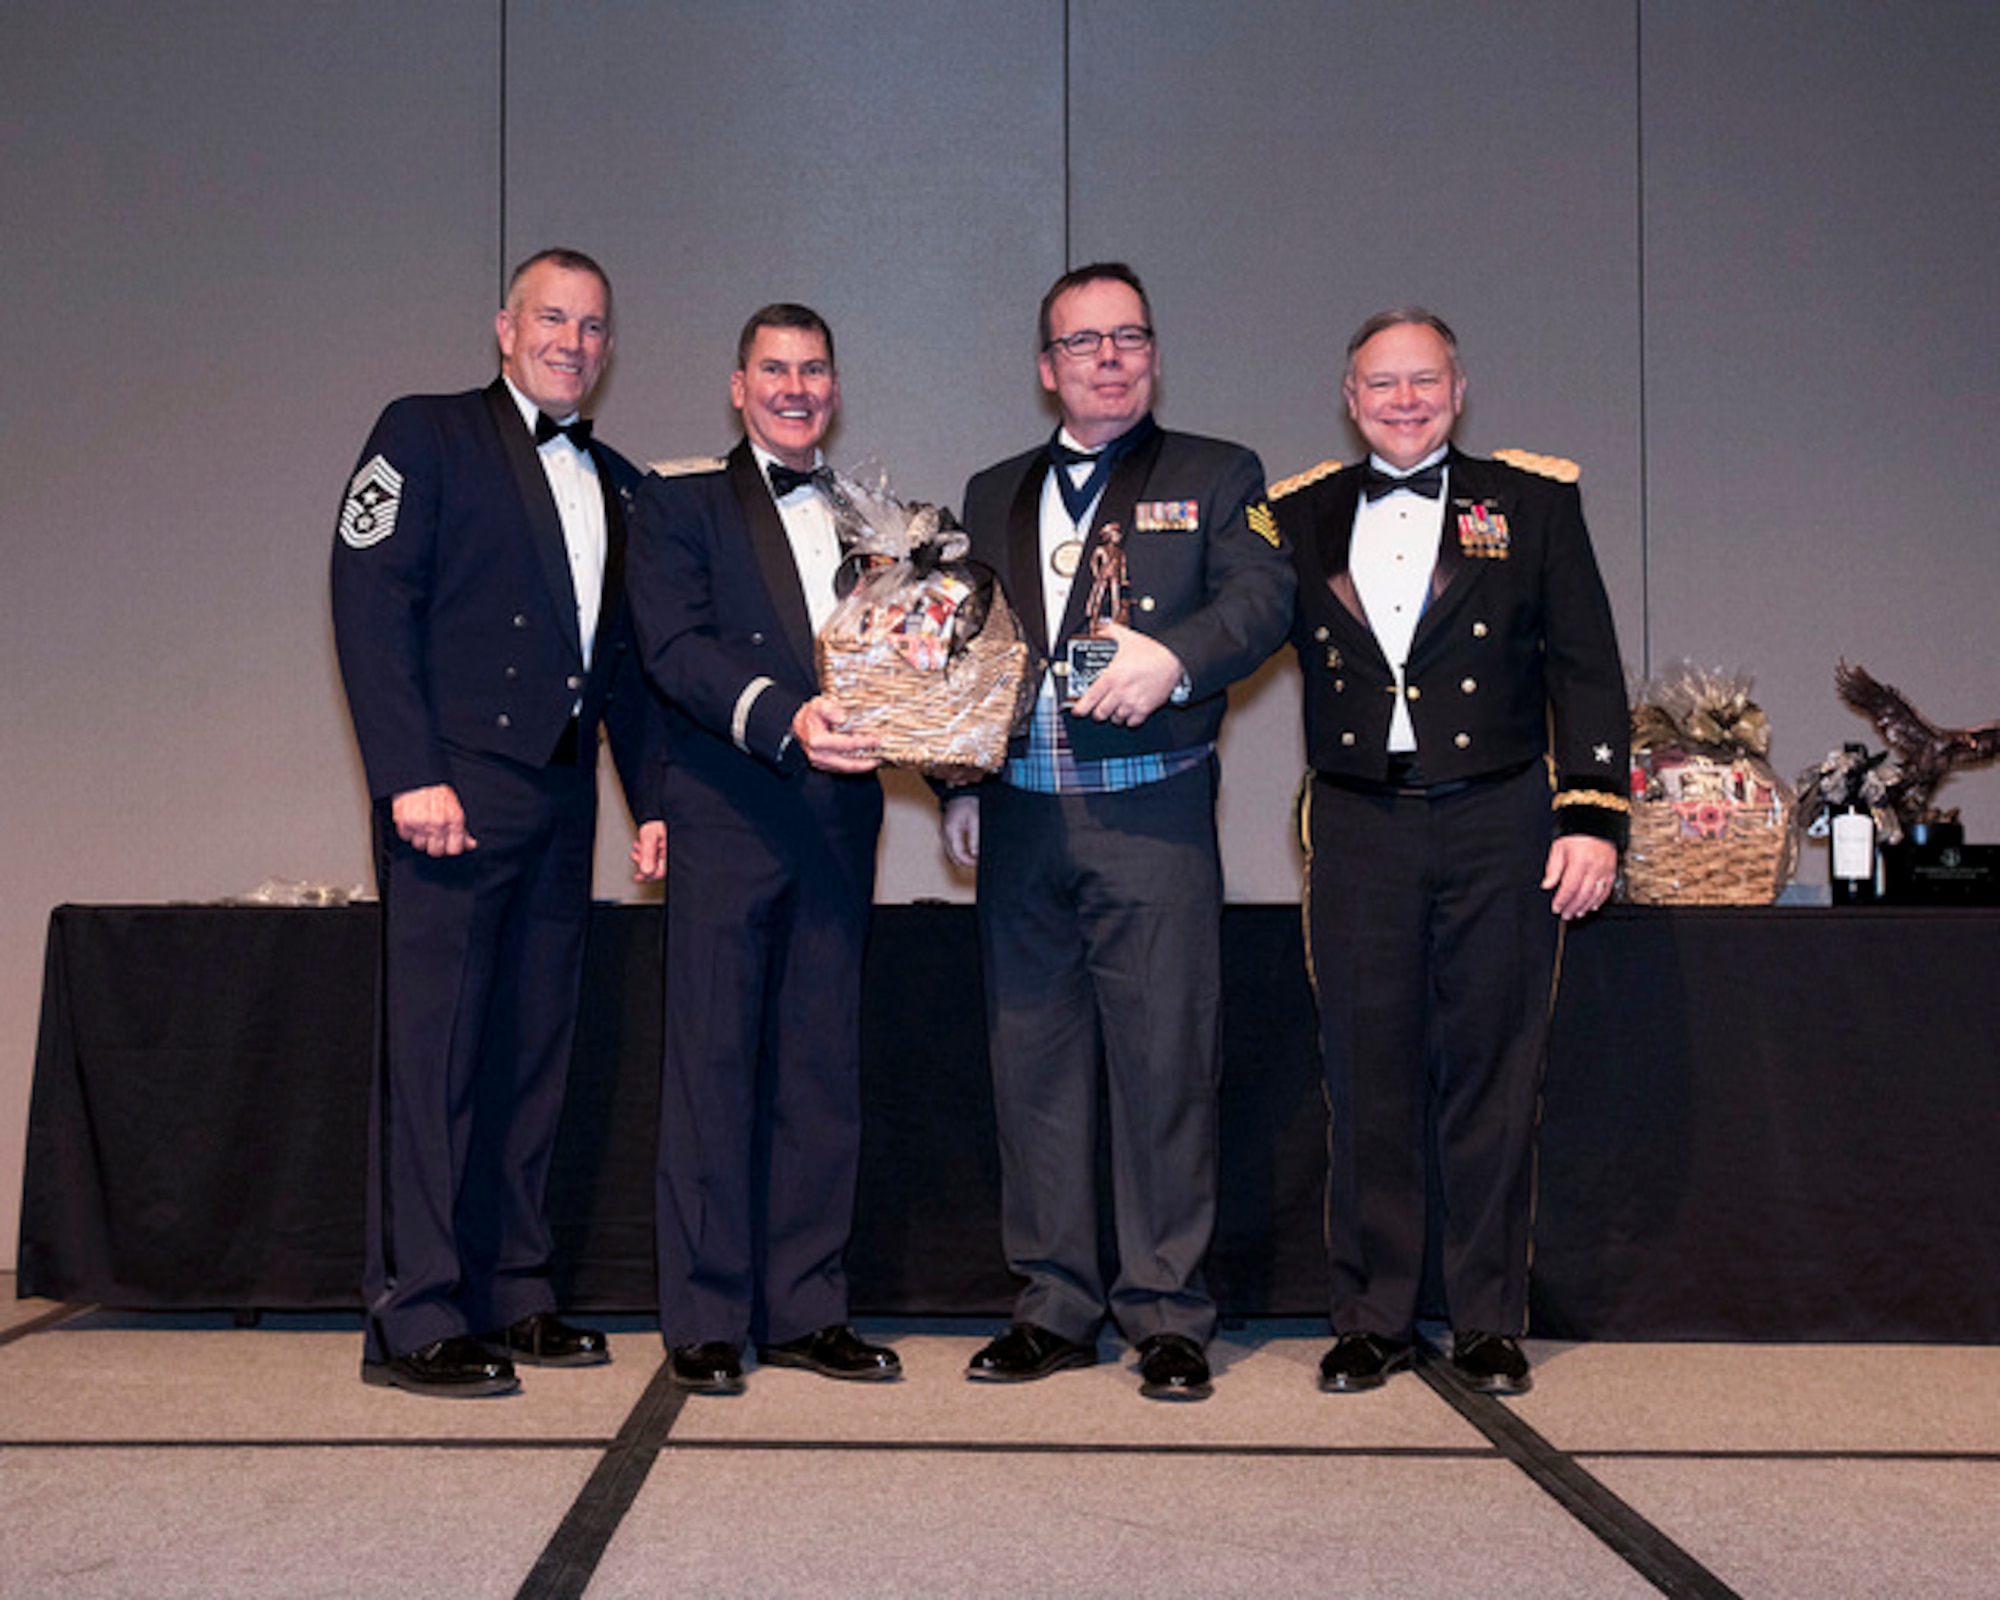 Royal Canadian Air Force Sgt. Yves Truchon of the 225th Air Defense Squadron wins the Honor Guard Member of the Year award at the Washington Air National Guard 8th Annual Awards Banquet.  Pictured from right to left are: Maj. Gen. Brett Daugherty, The Adjutant General, Washington; RCAF Sgt. Yves Truchon; Brig. Gen. John Tuohy, the Assistant Adjutant General - Air, Washington; and Chief Master Sgt. Max Tidwell, WA ANG Command Chief. (U.S. Air Force photo by Tech. Sgt. Michael Brown) 